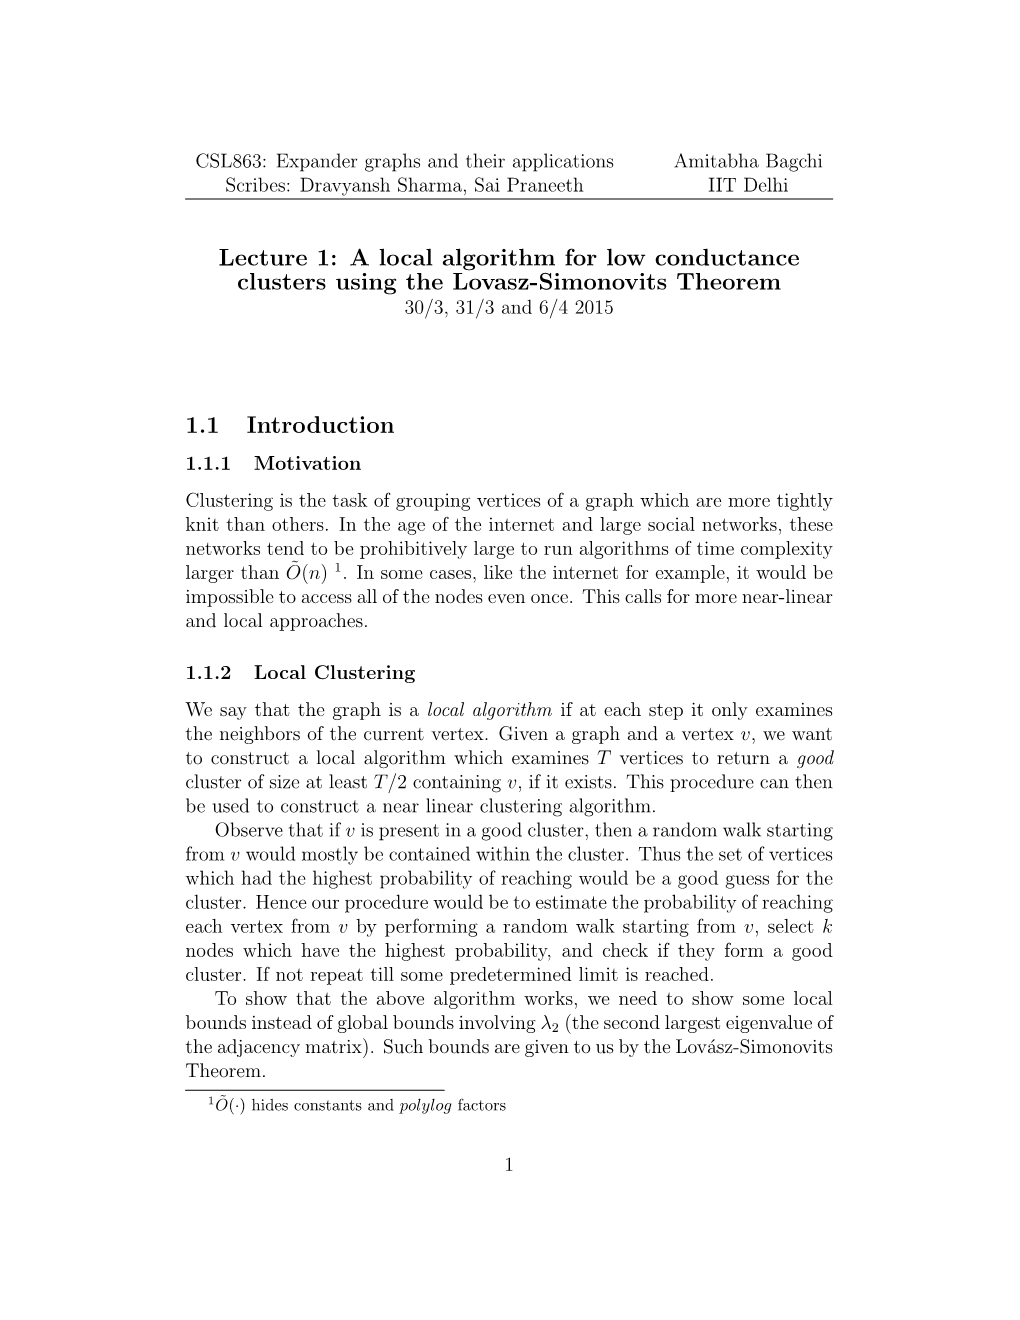 Lecture 1: a Local Algorithm for Low Conductance Clusters Using the Lovasz-Simonovits Theorem 30/3, 31/3 and 6/4 2015